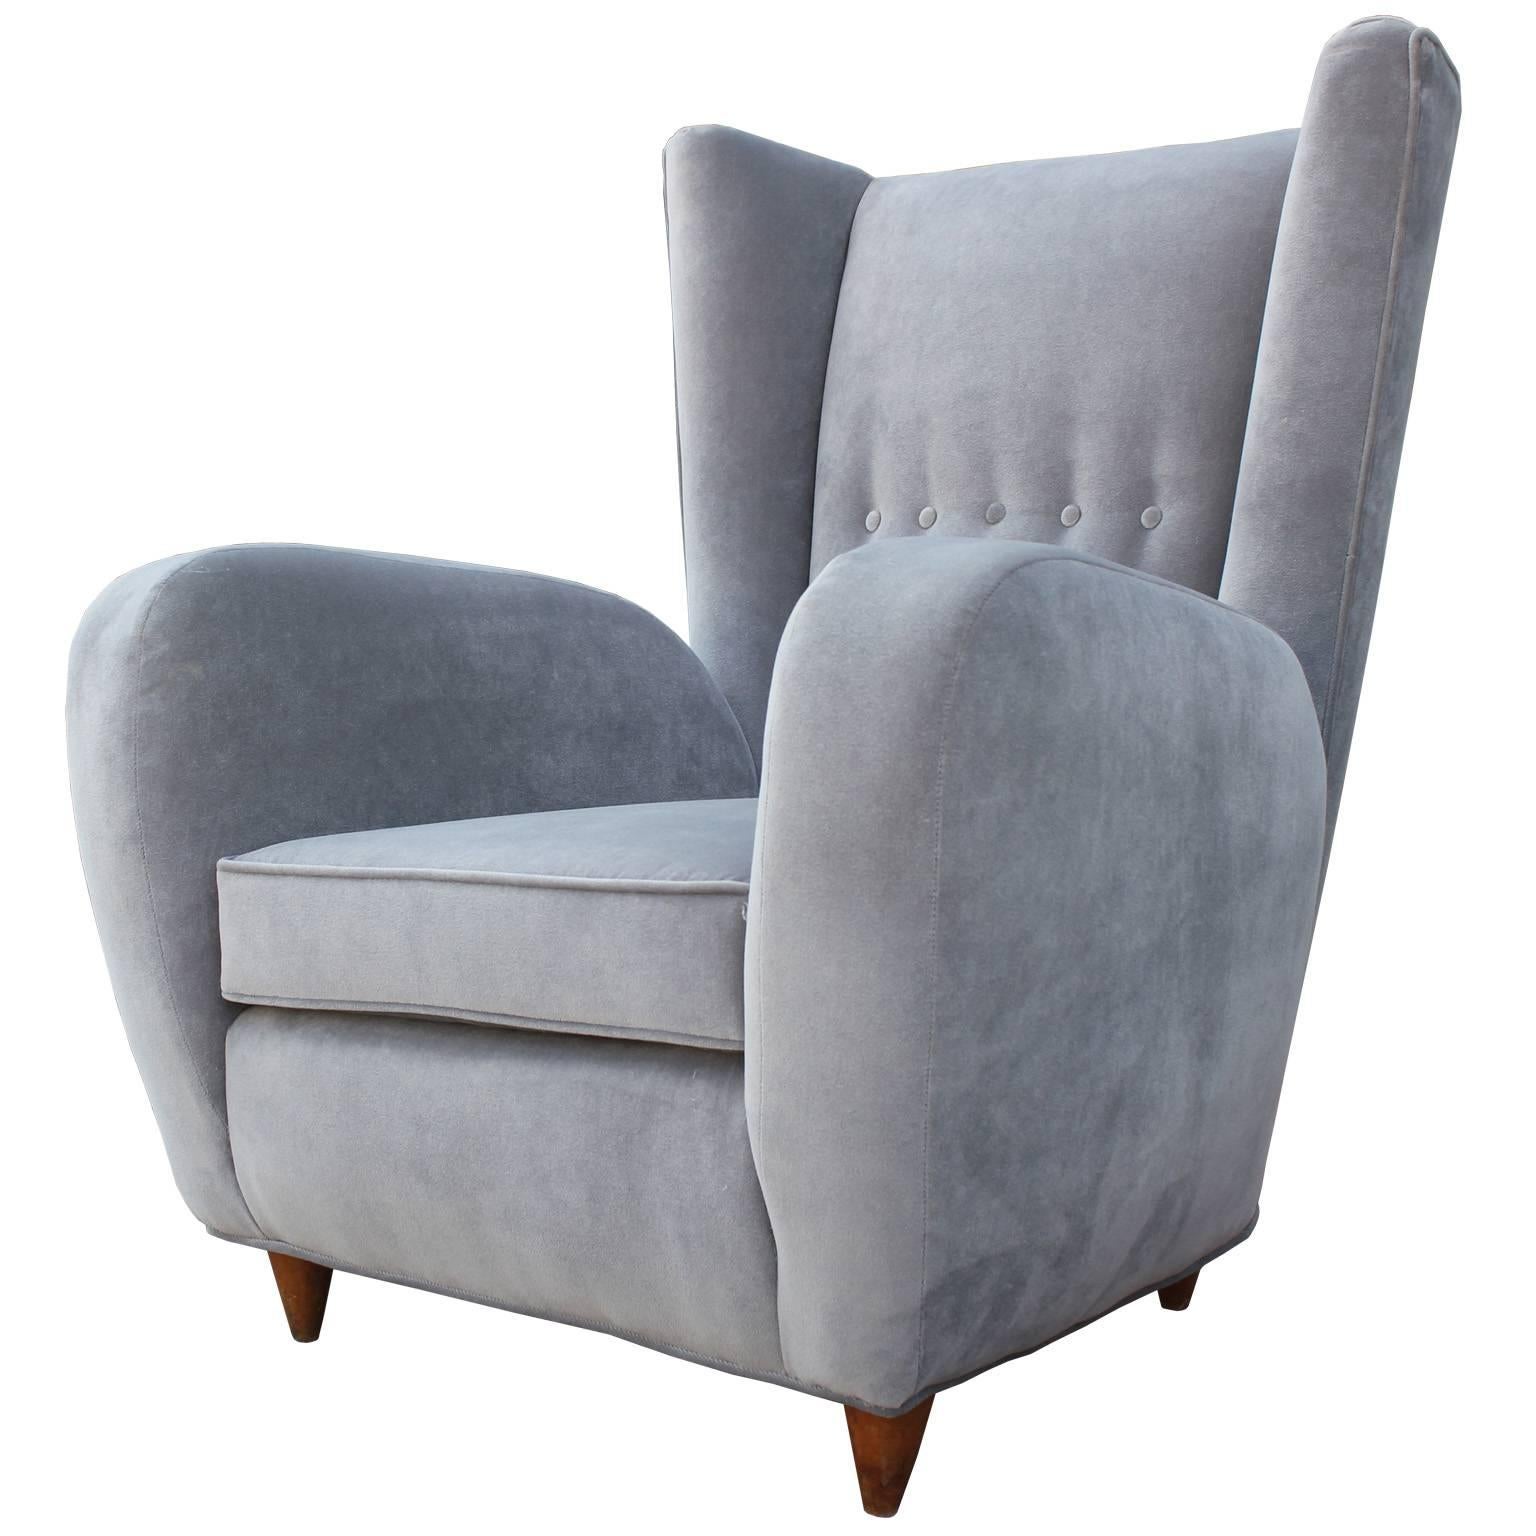 Pair of sculptural, Italian wingback lounge chairs in the style of Paolo Buffa. Chairs have dramatic over the top lines. Chairs are finished with delicate tapered legs. Freshly upholstered in a pale silver grey velvet.